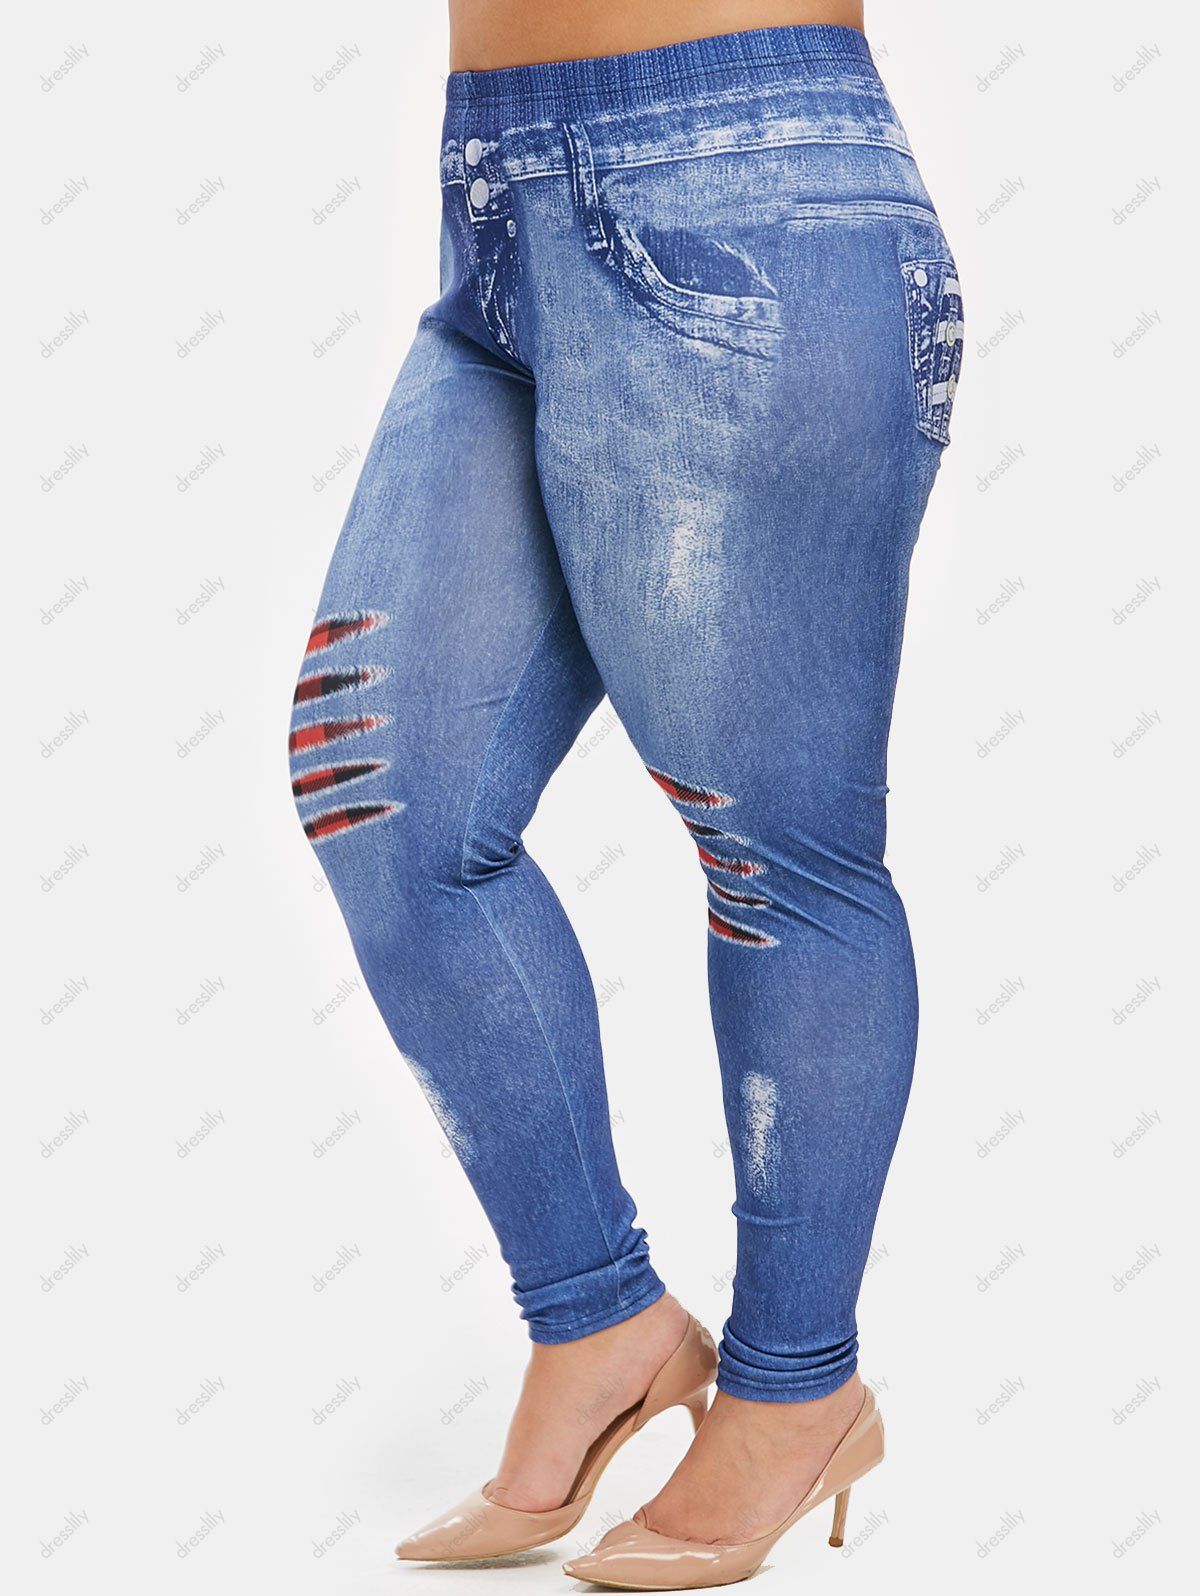 Hue Plus Size Jean Leggings  International Society of Precision Agriculture